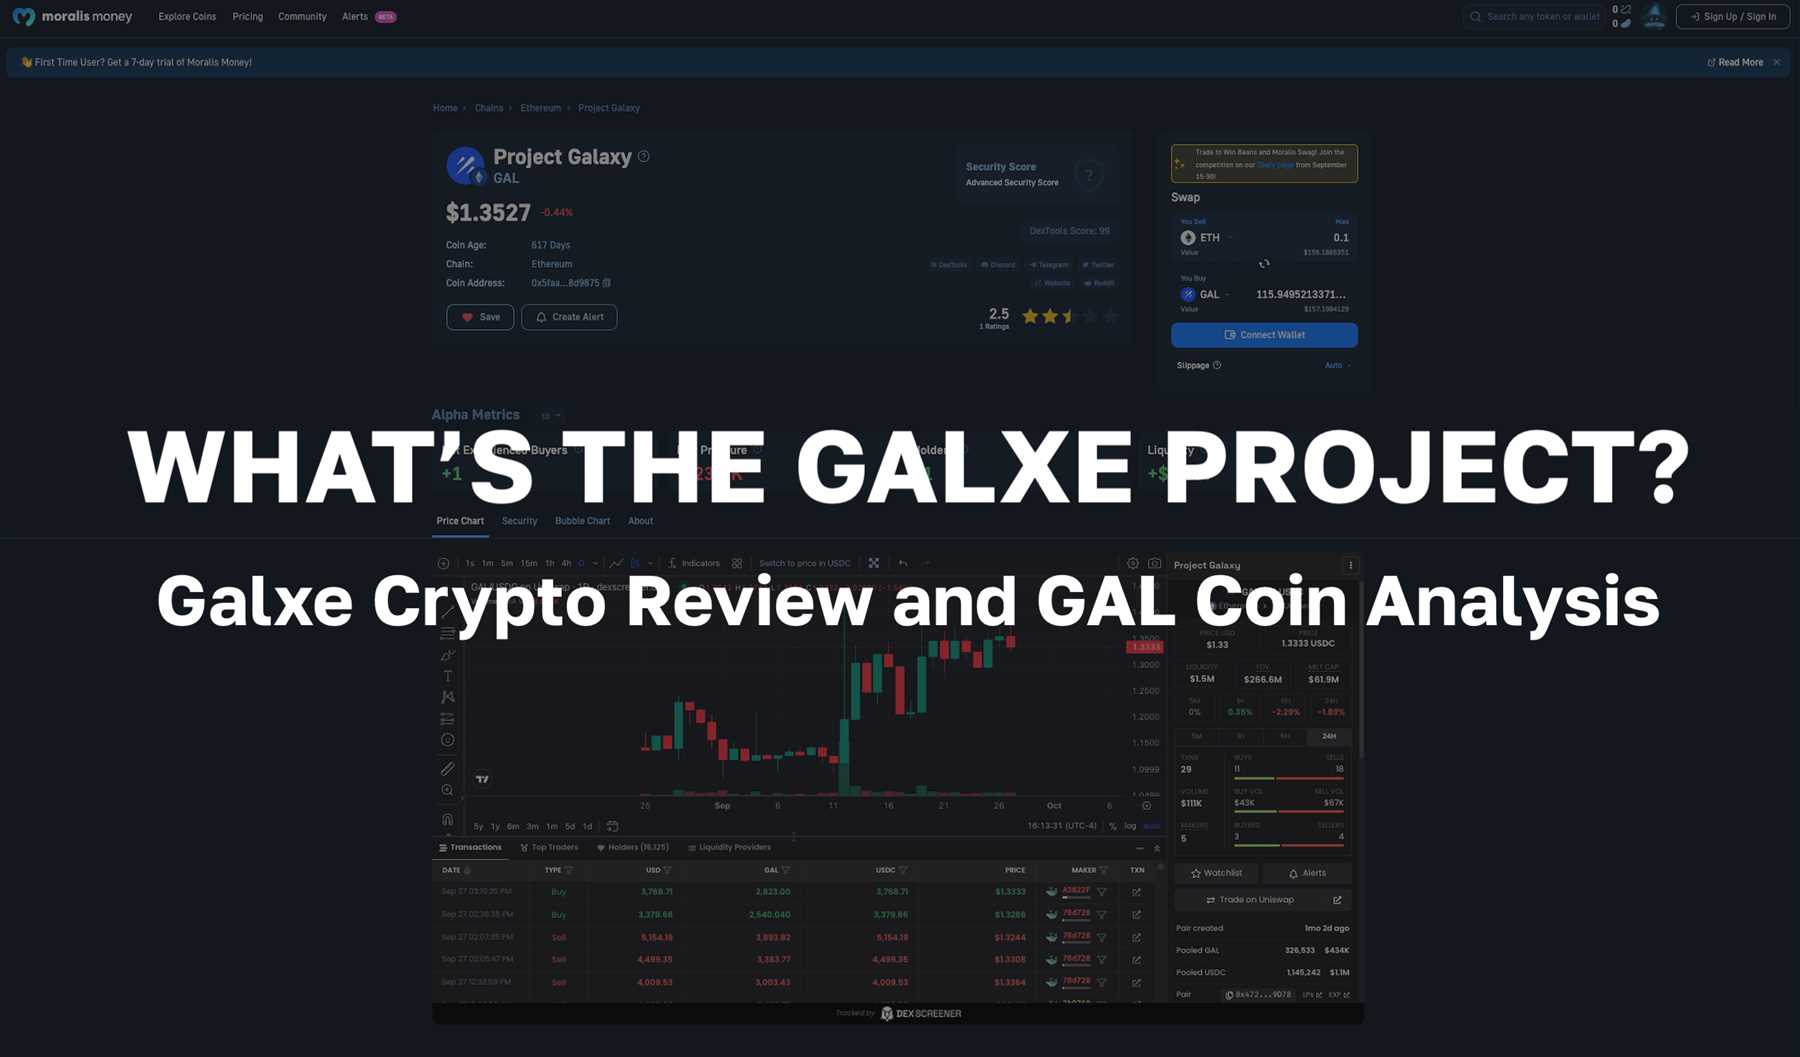 Why Galxe is the Next Big Thing